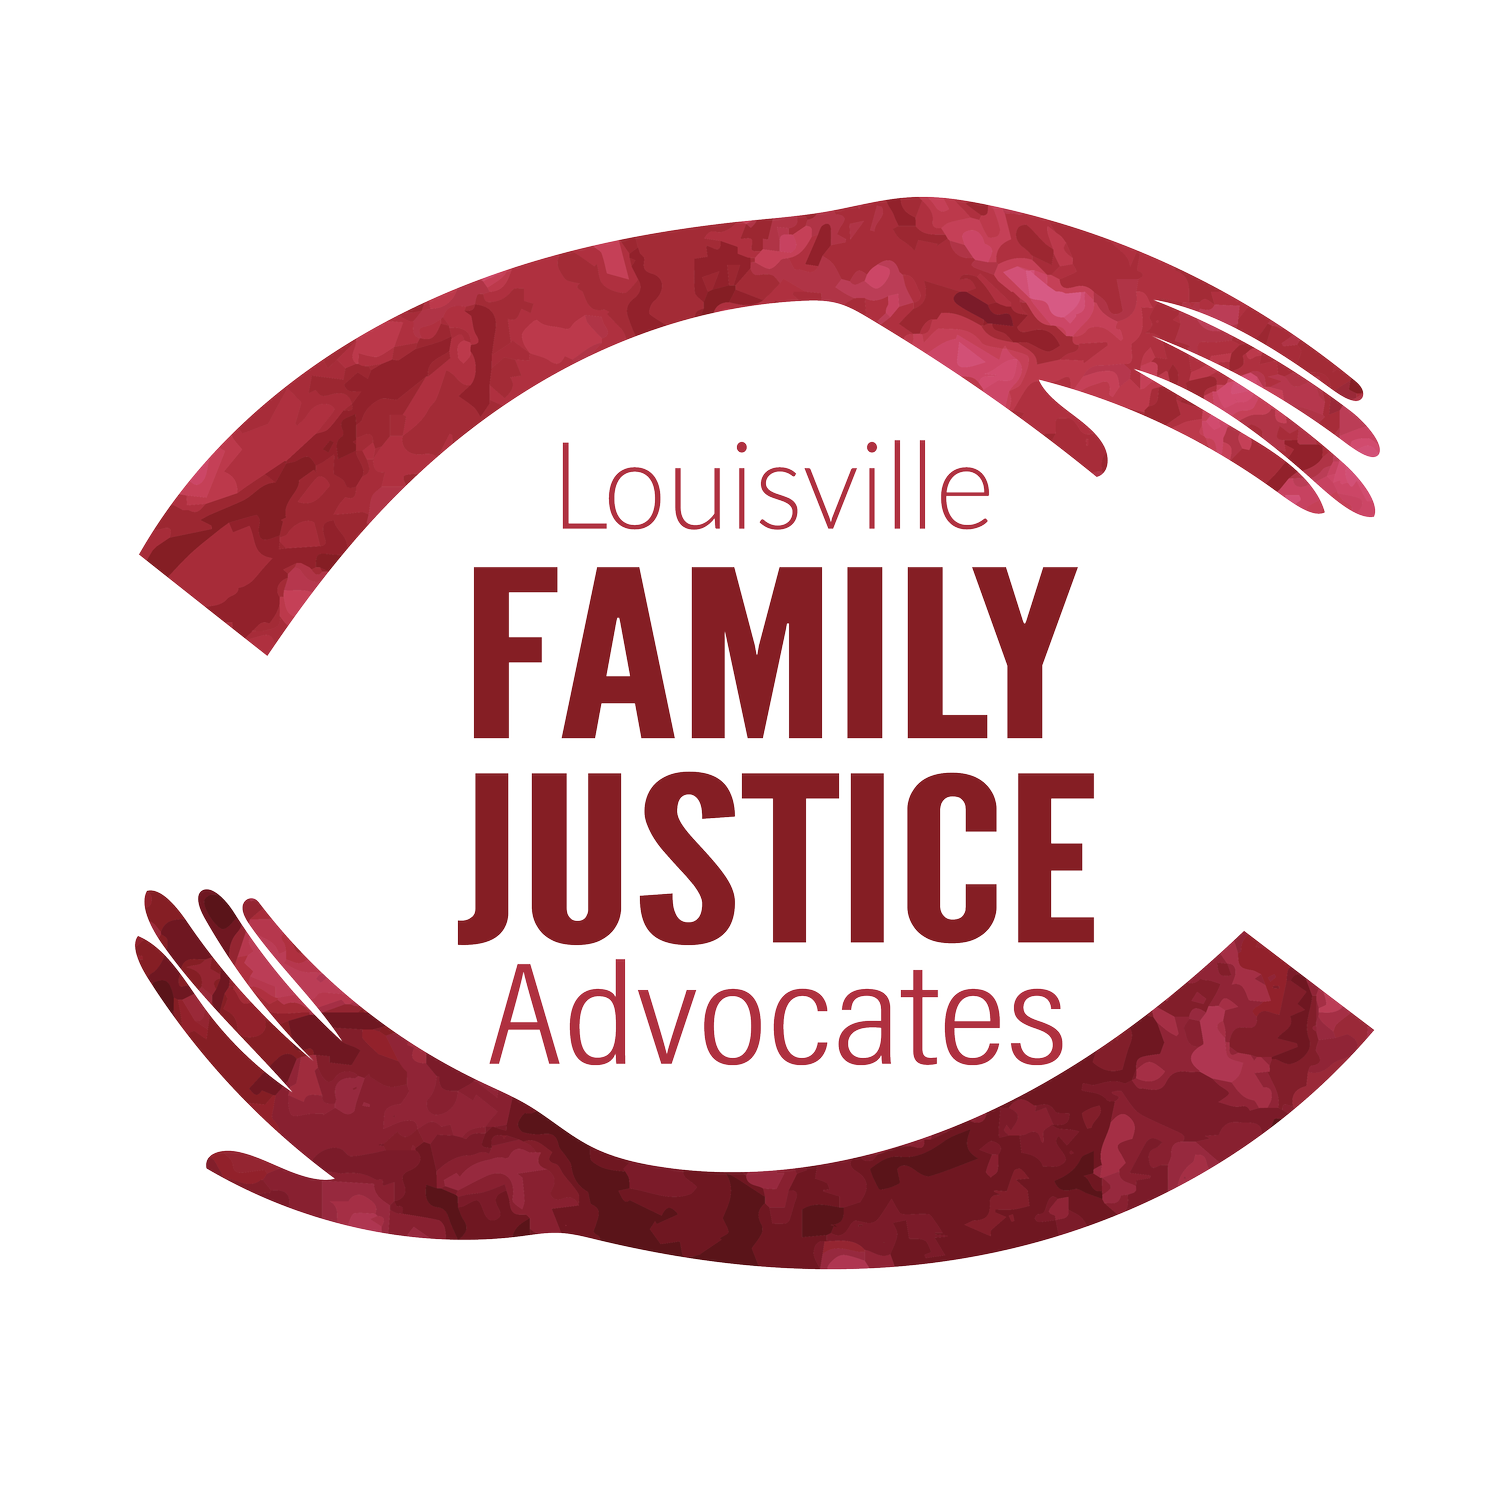 Louisville Family Justice Advocates